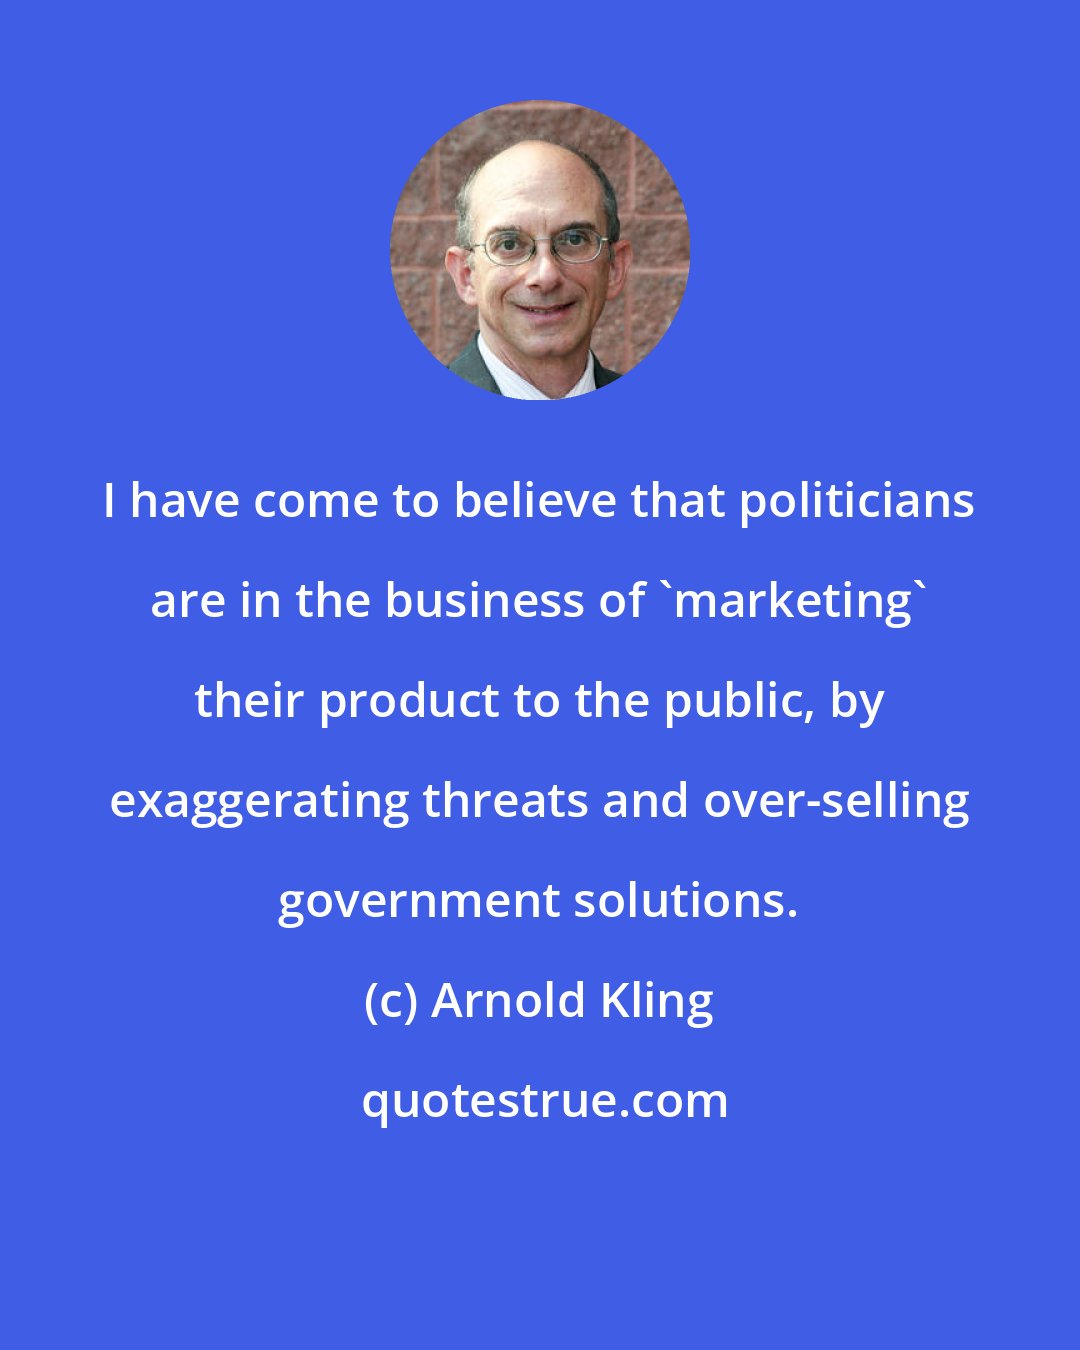 Arnold Kling: I have come to believe that politicians are in the business of 'marketing' their product to the public, by exaggerating threats and over-selling government solutions.